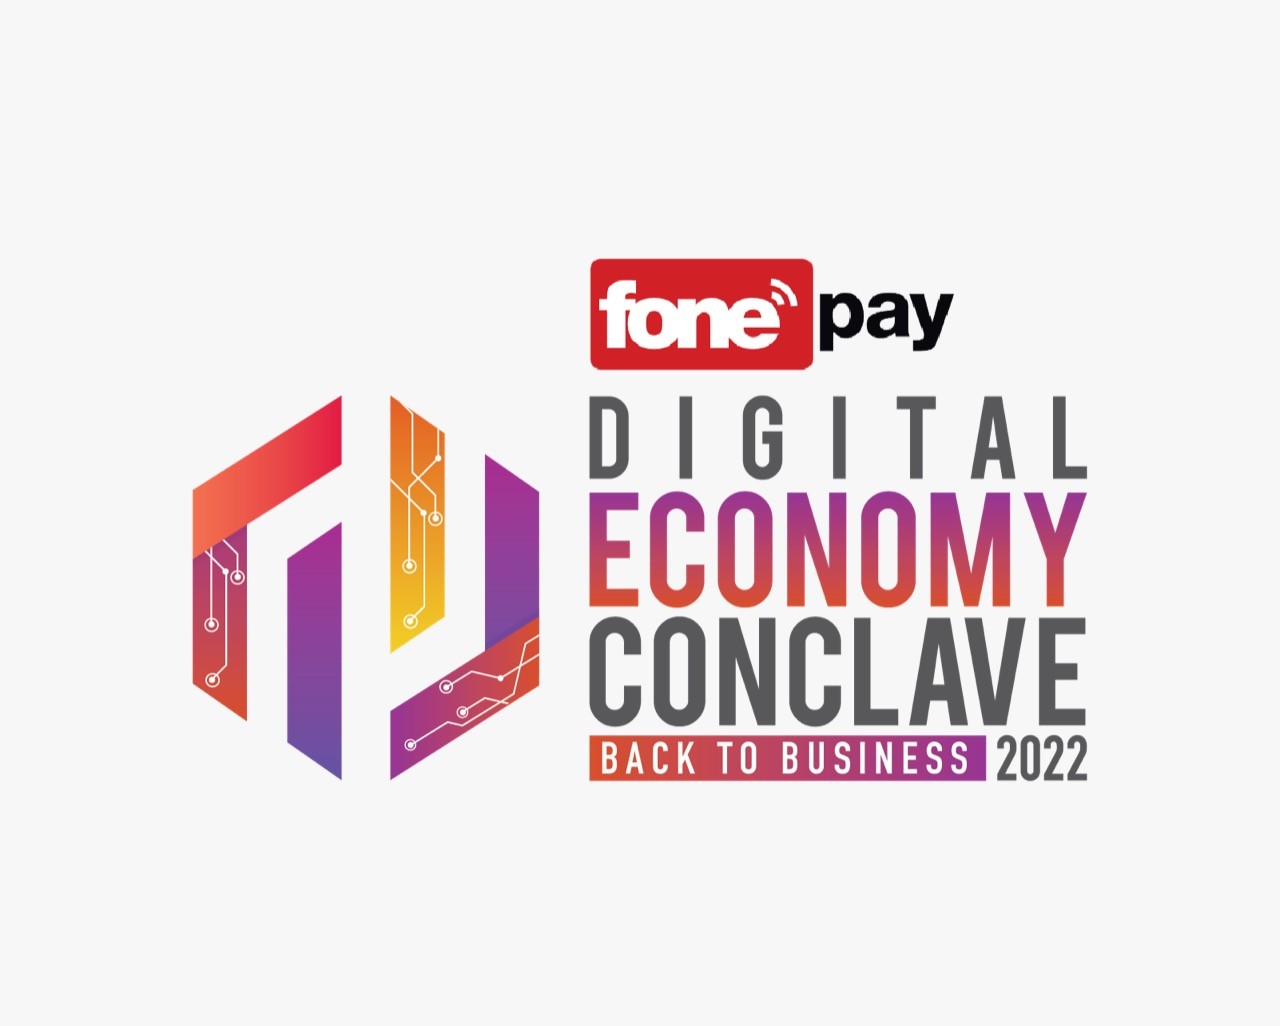 Fonepay Digital Economy Conclave is holding its second edition